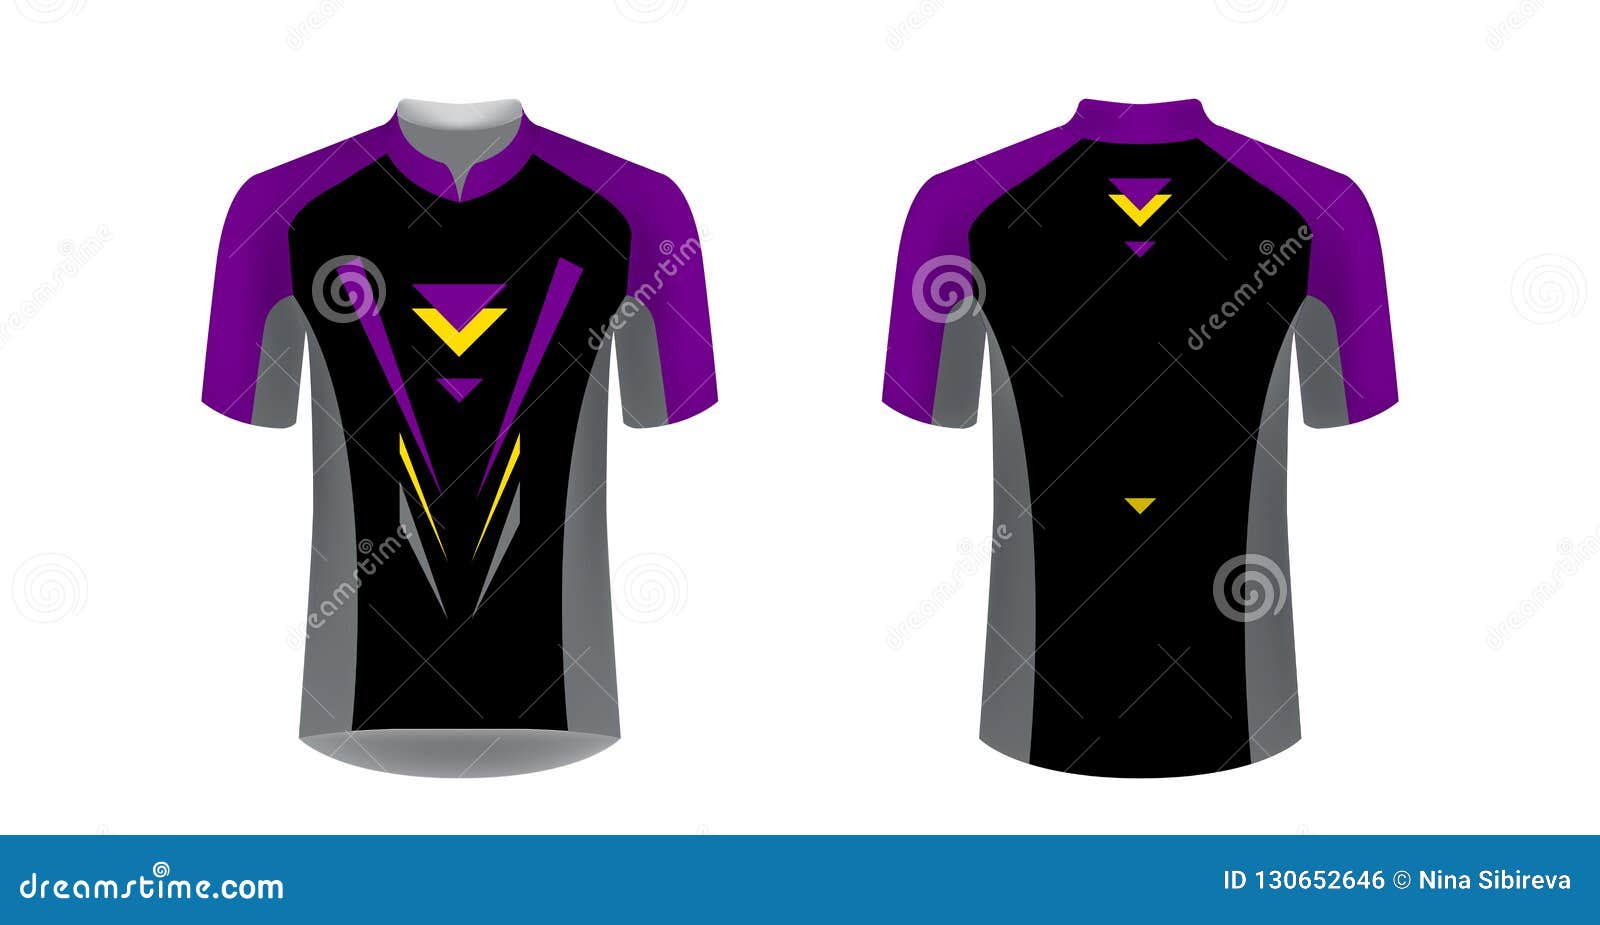 Download Cycling Jersey Mockup Stock Vector Illustration Of Casual 130652646